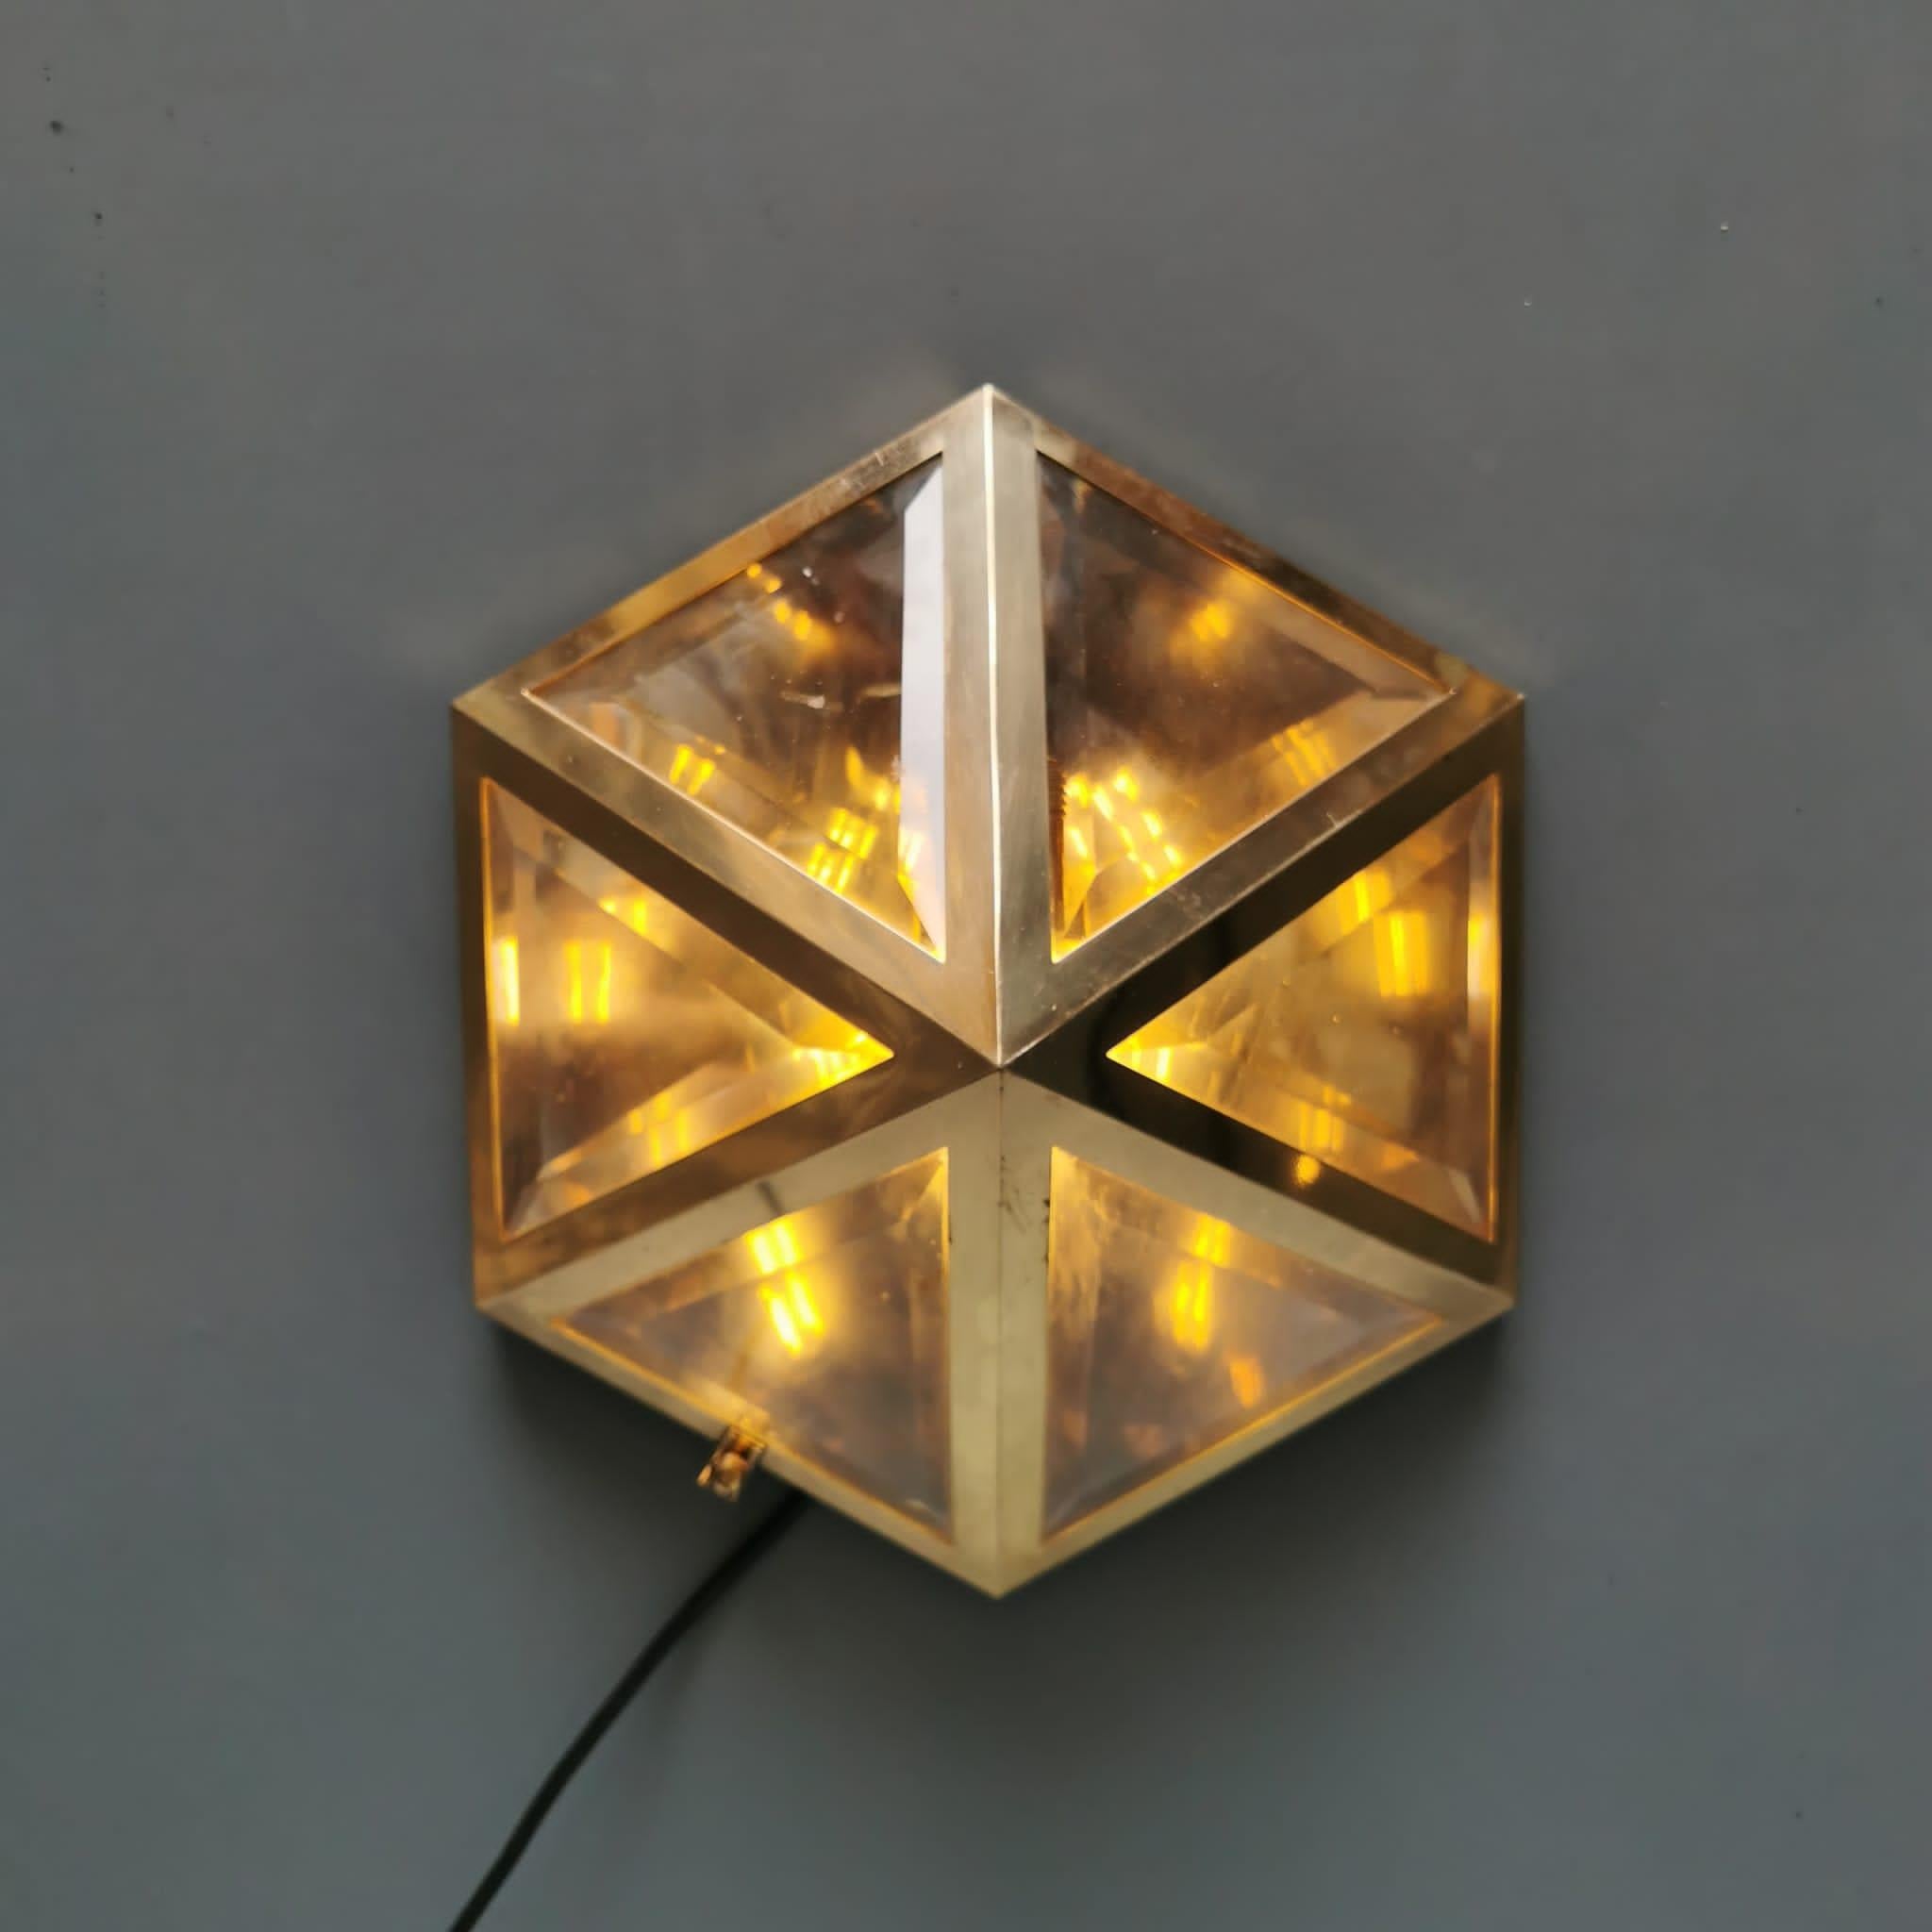 Brass and faceted transparent glass wall lamp designed in 1903 by Josef Hoffmann, Austrian architect and designer, among the founders of the Viennese secession, a lamp that was published and produced in the 1970s in Austria. A brass wall lamp with 6